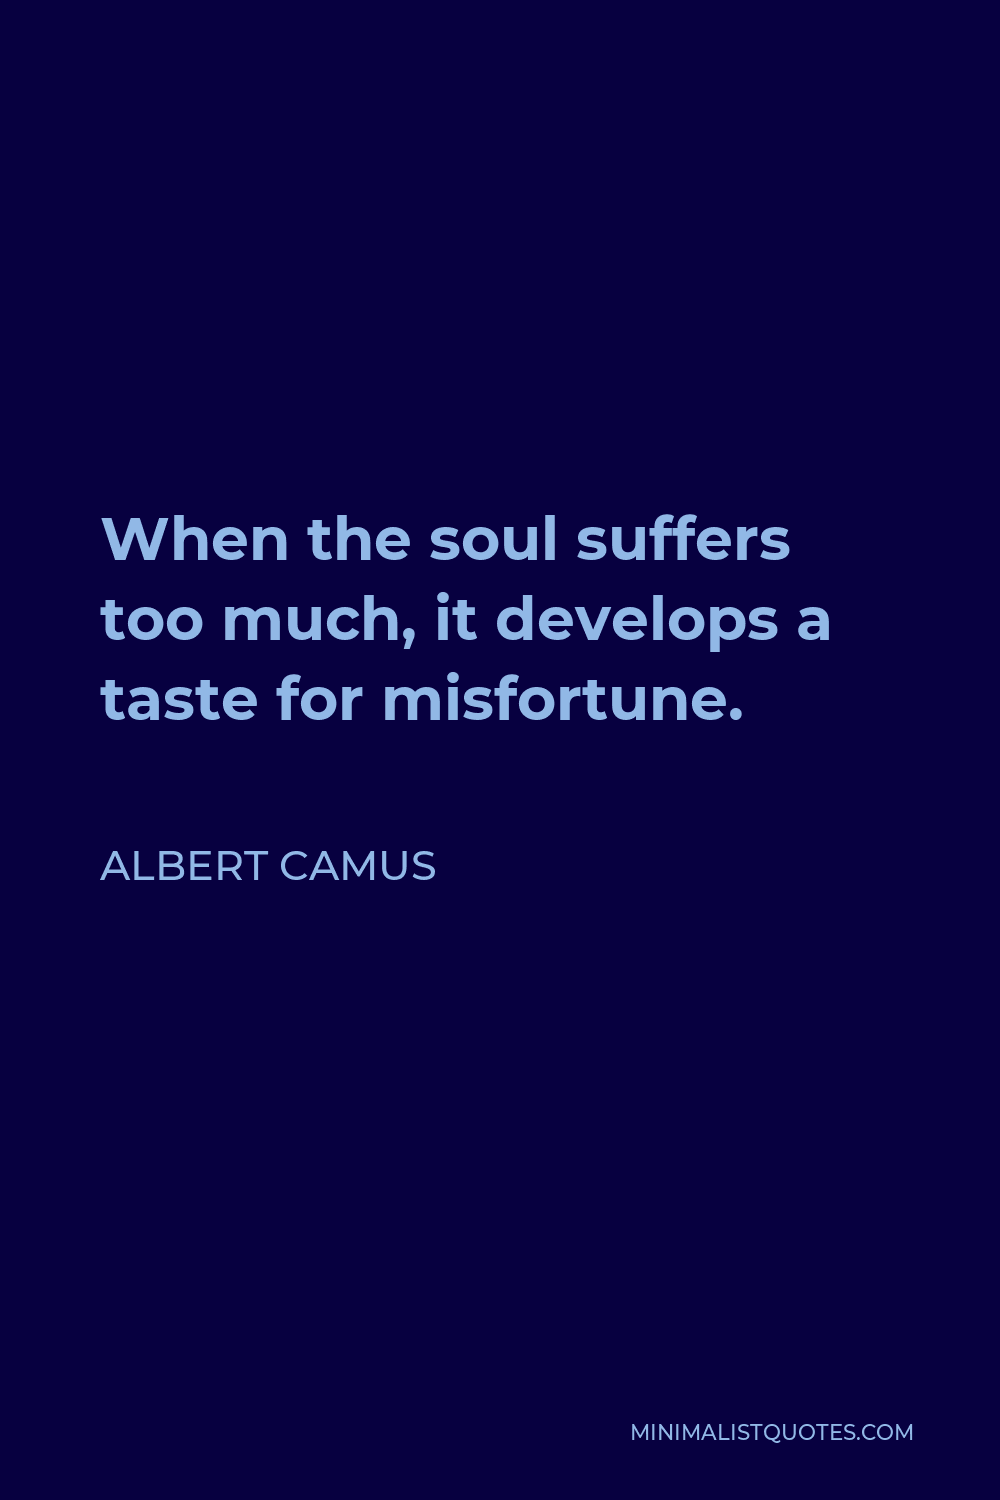 Albert Camus Quote - When the soul suffers too much, it develops a taste for misfortune.